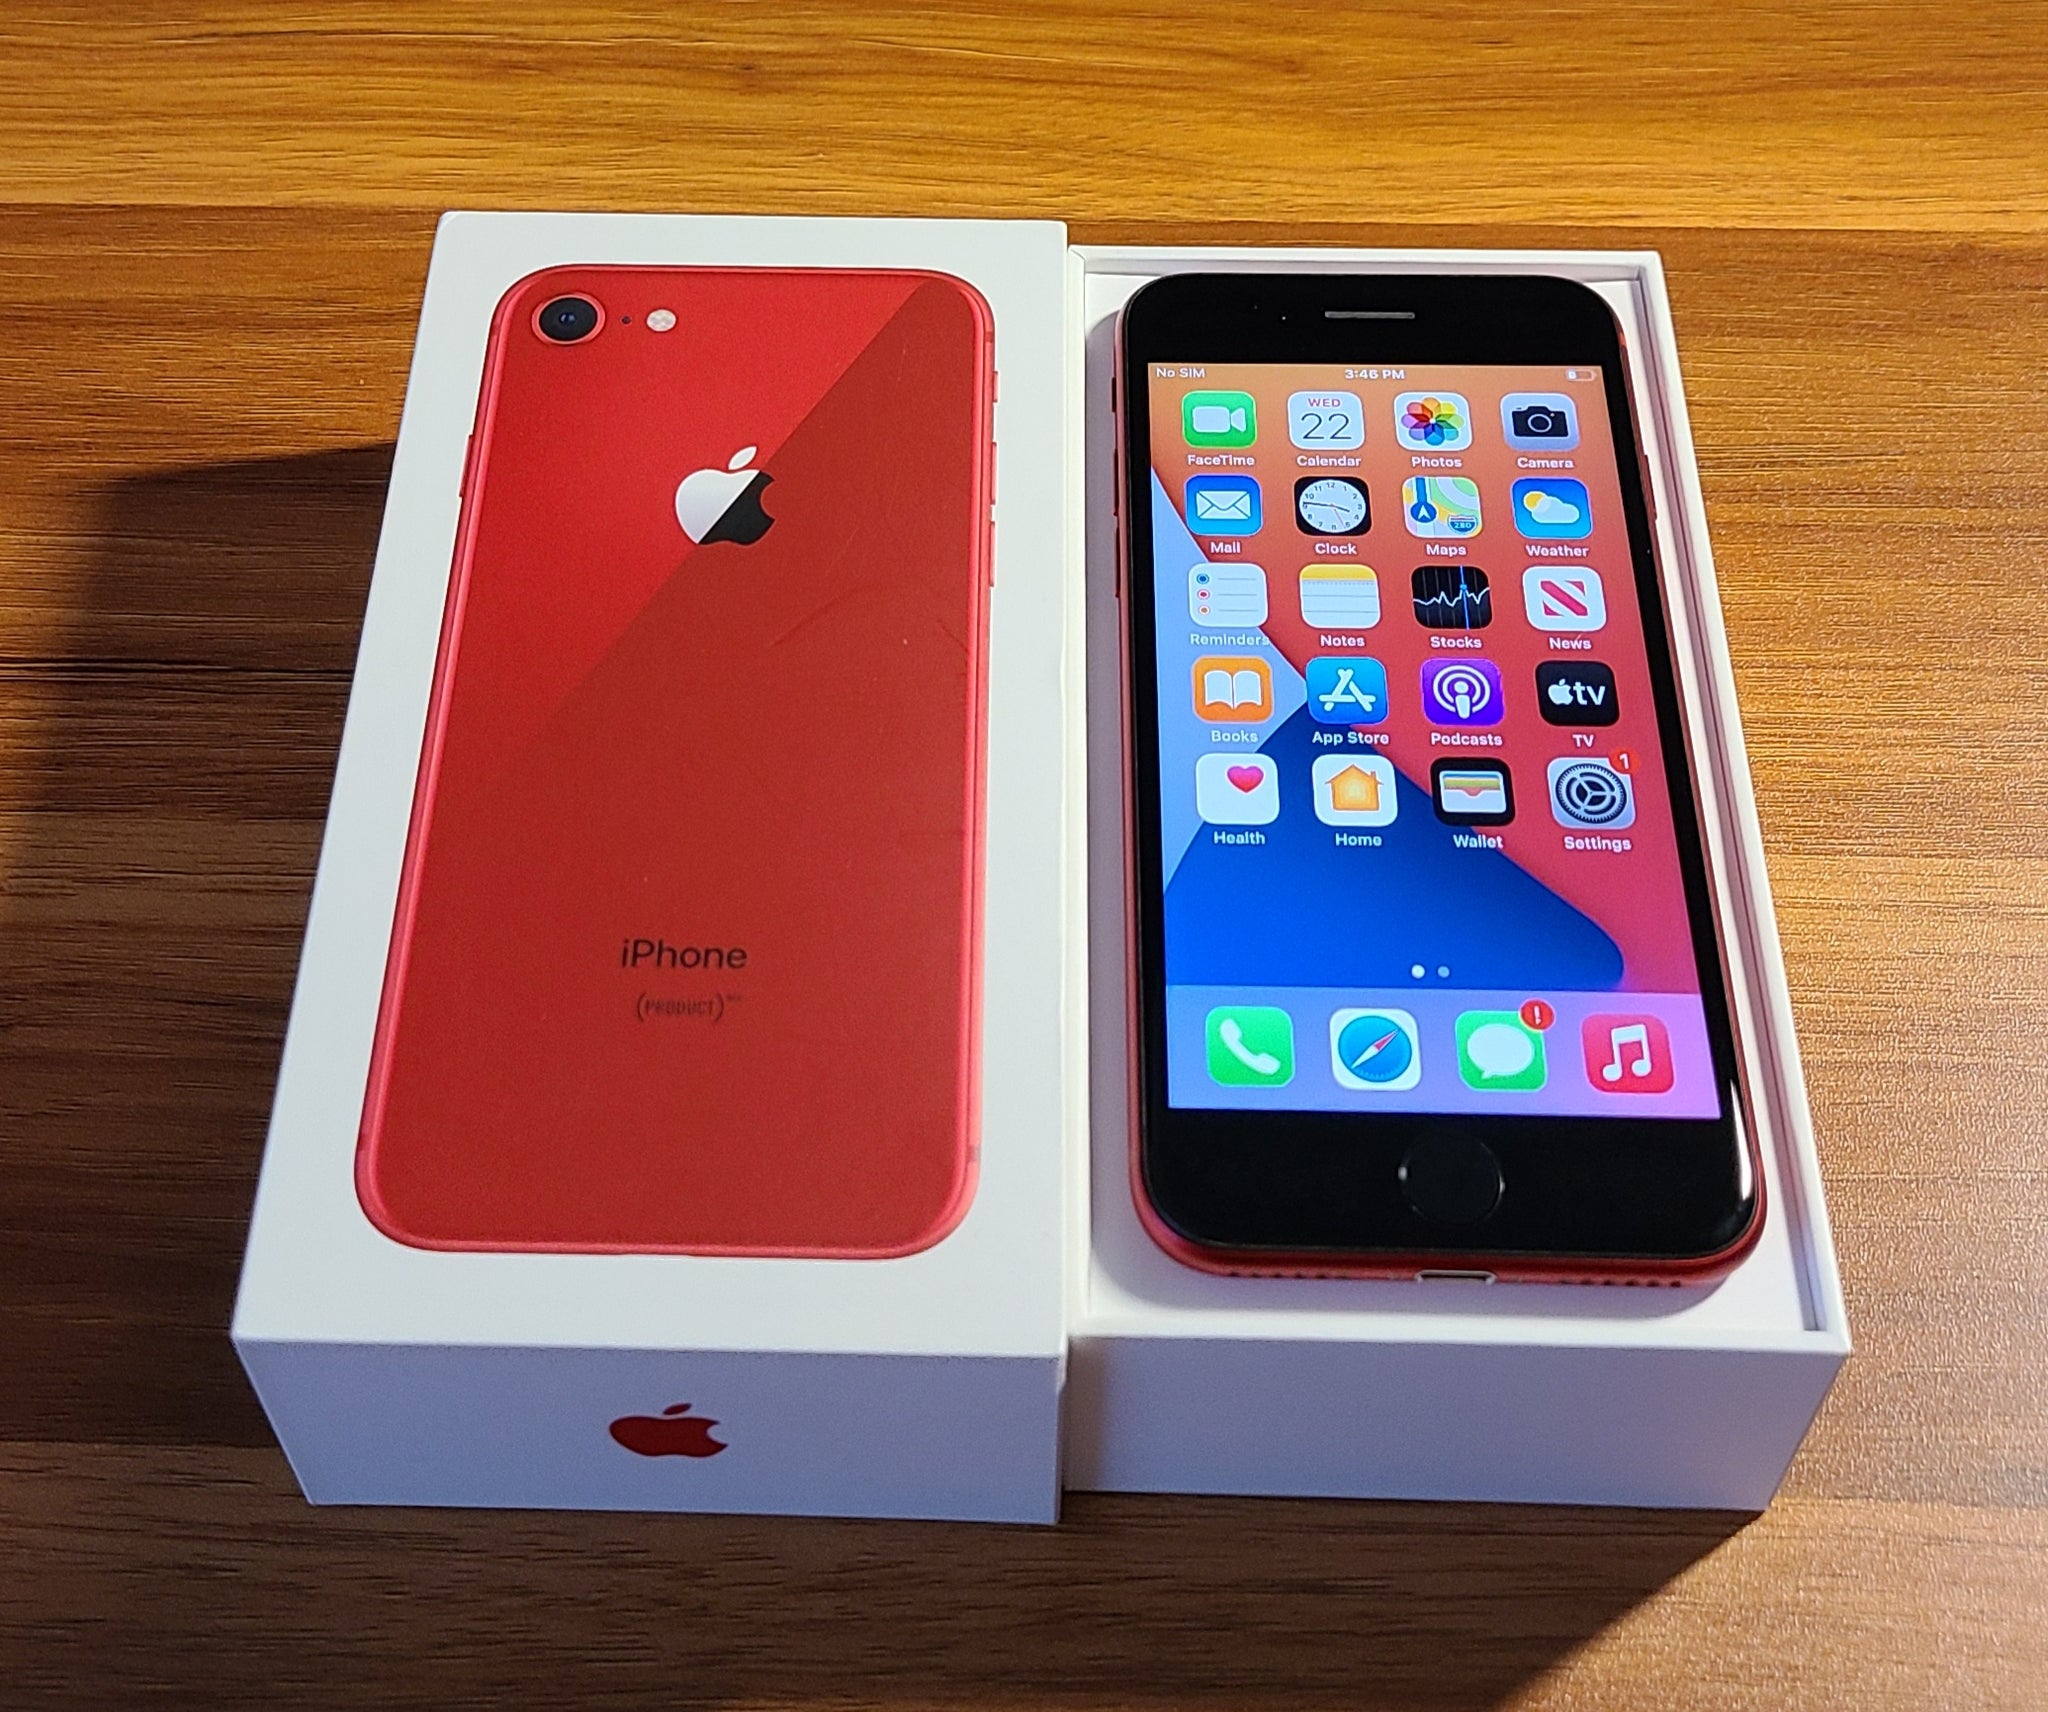 iPhone 8 64 GB (product)red